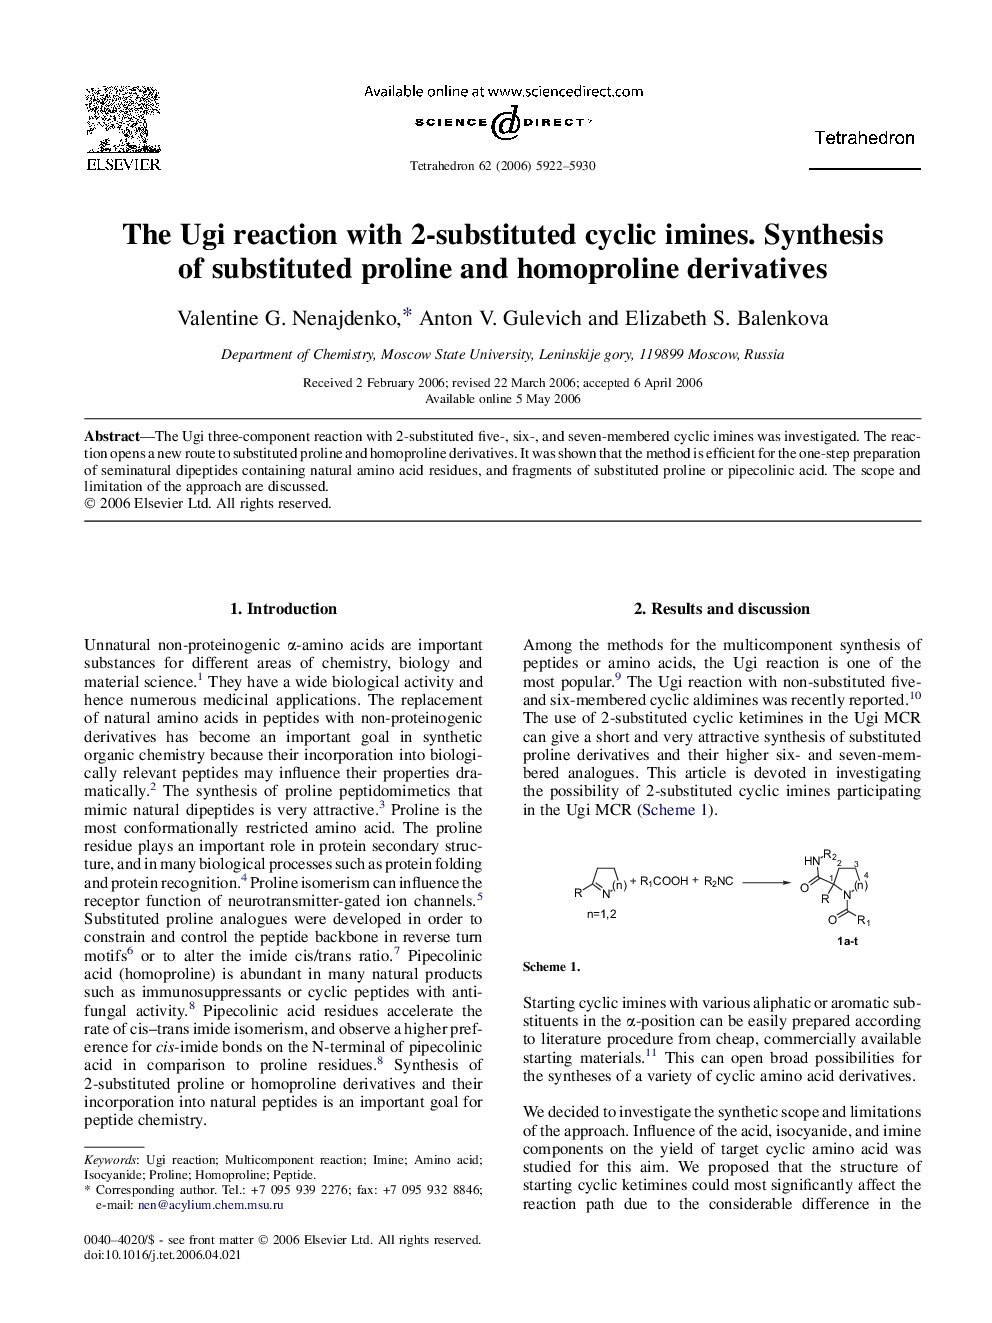 The Ugi reaction with 2-substituted cyclic imines. Synthesis of substituted proline and homoproline derivatives